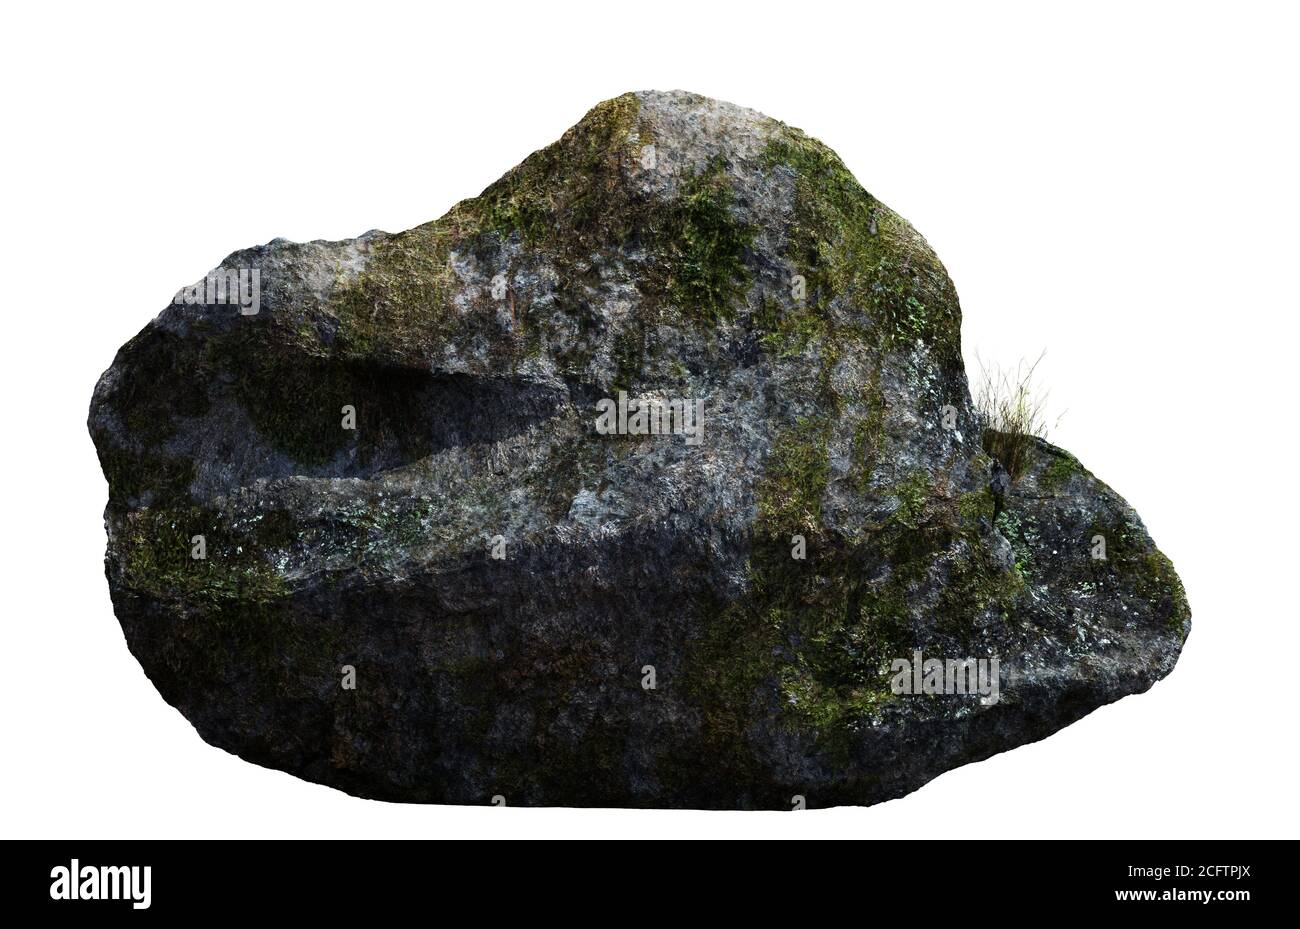 boulder covered with moss, lichen and grass, rock isolated on white background Stock Photo